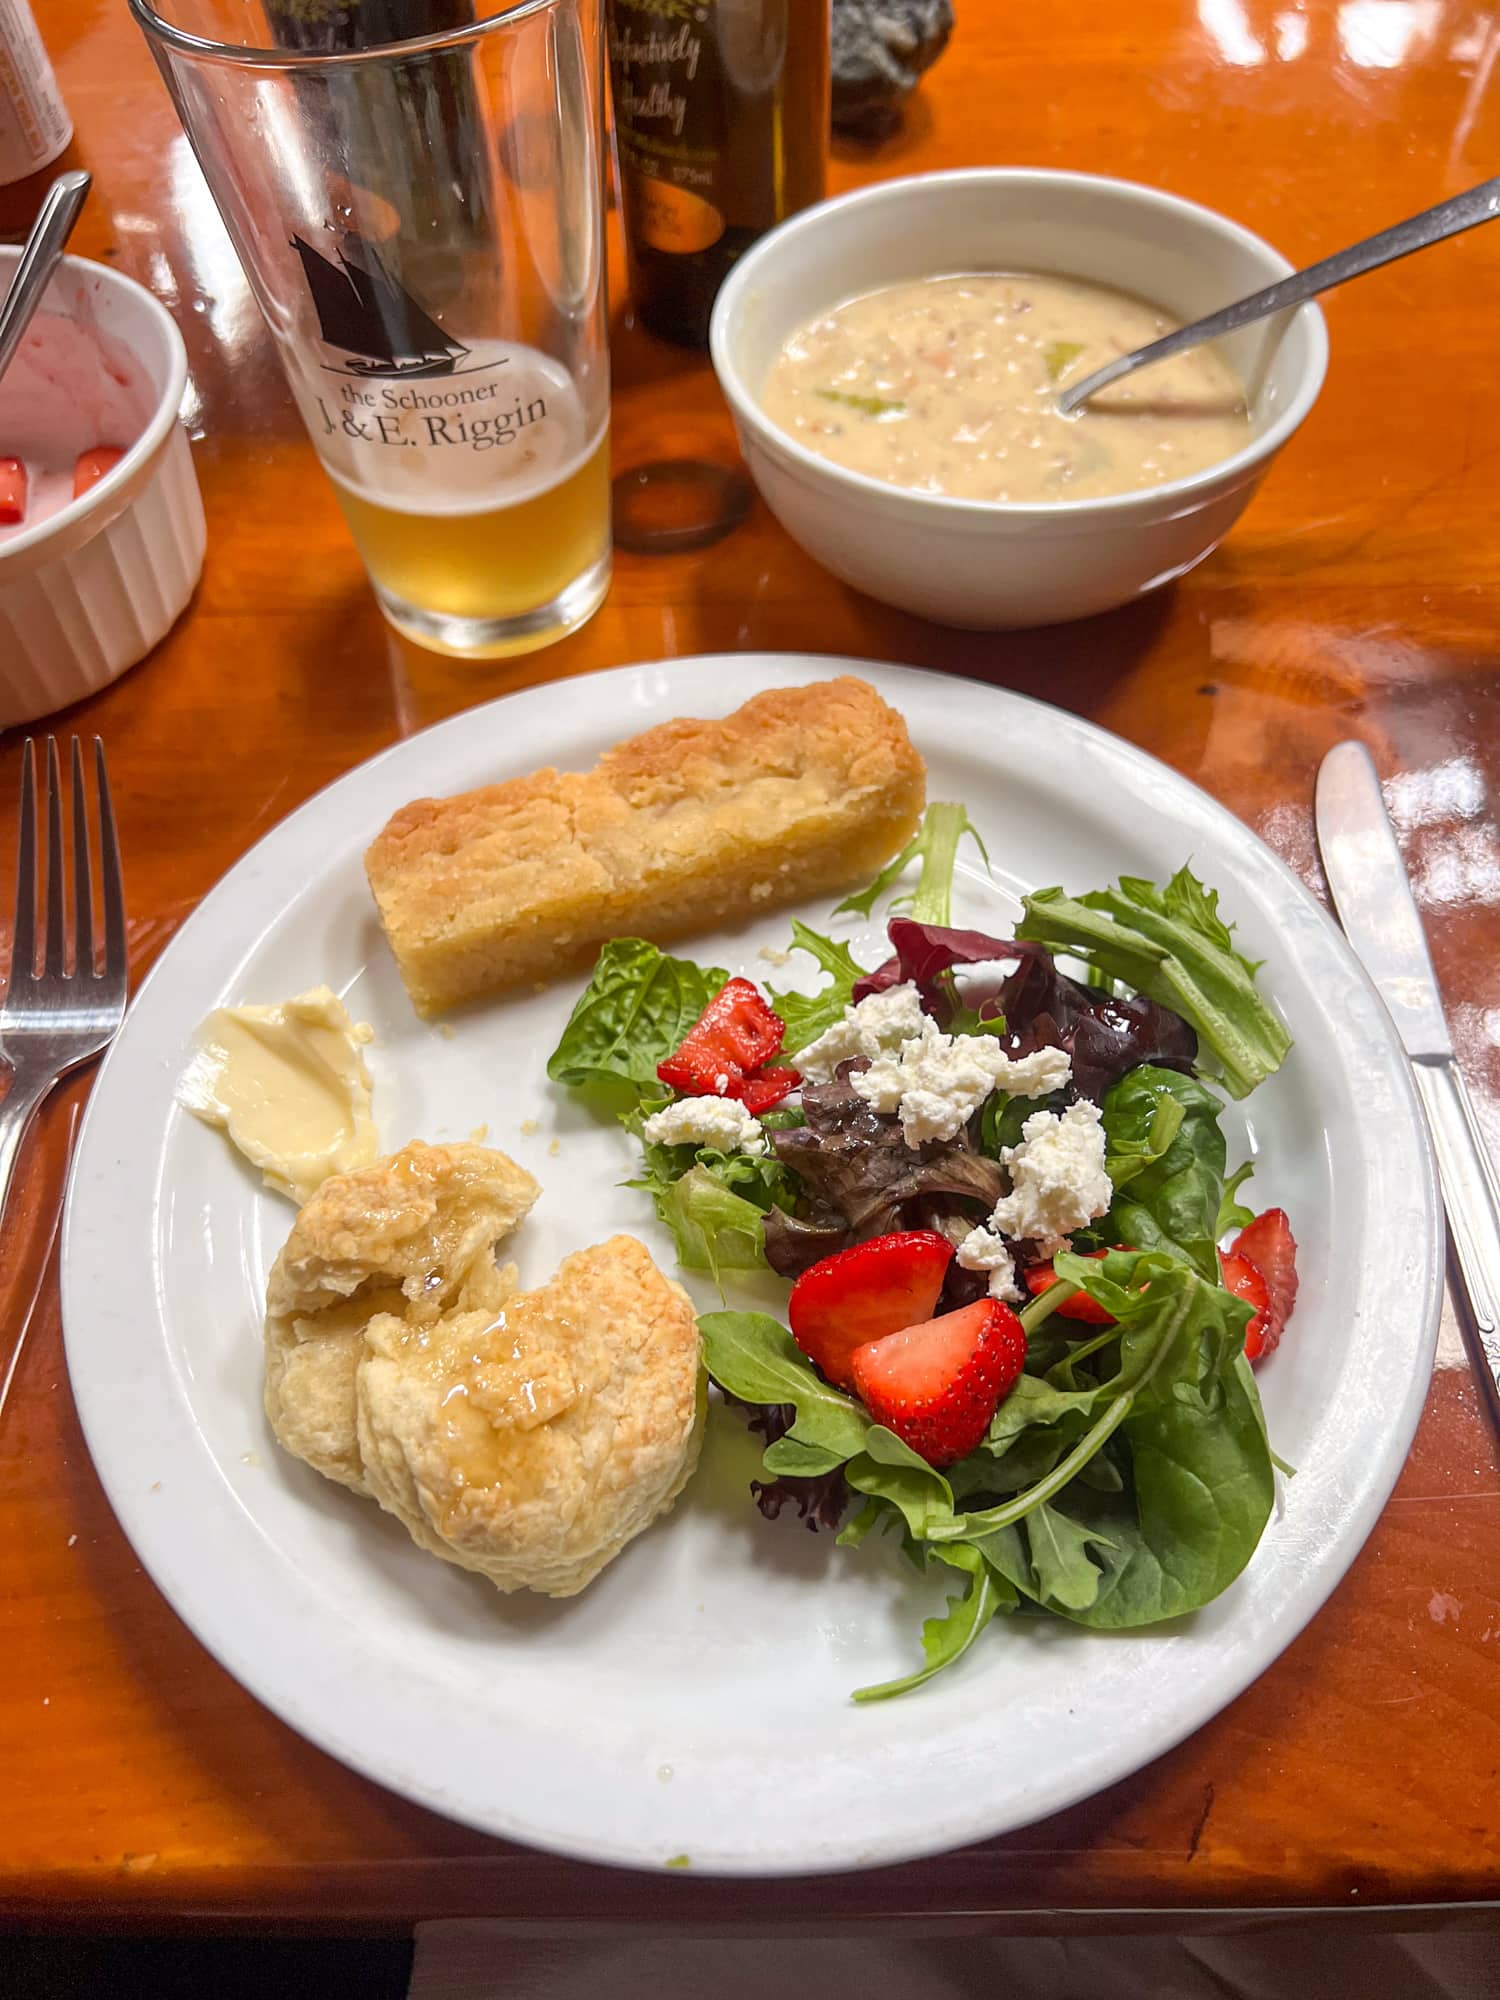 Biscuits and honey, goat cheese salad, and New England clam chowder